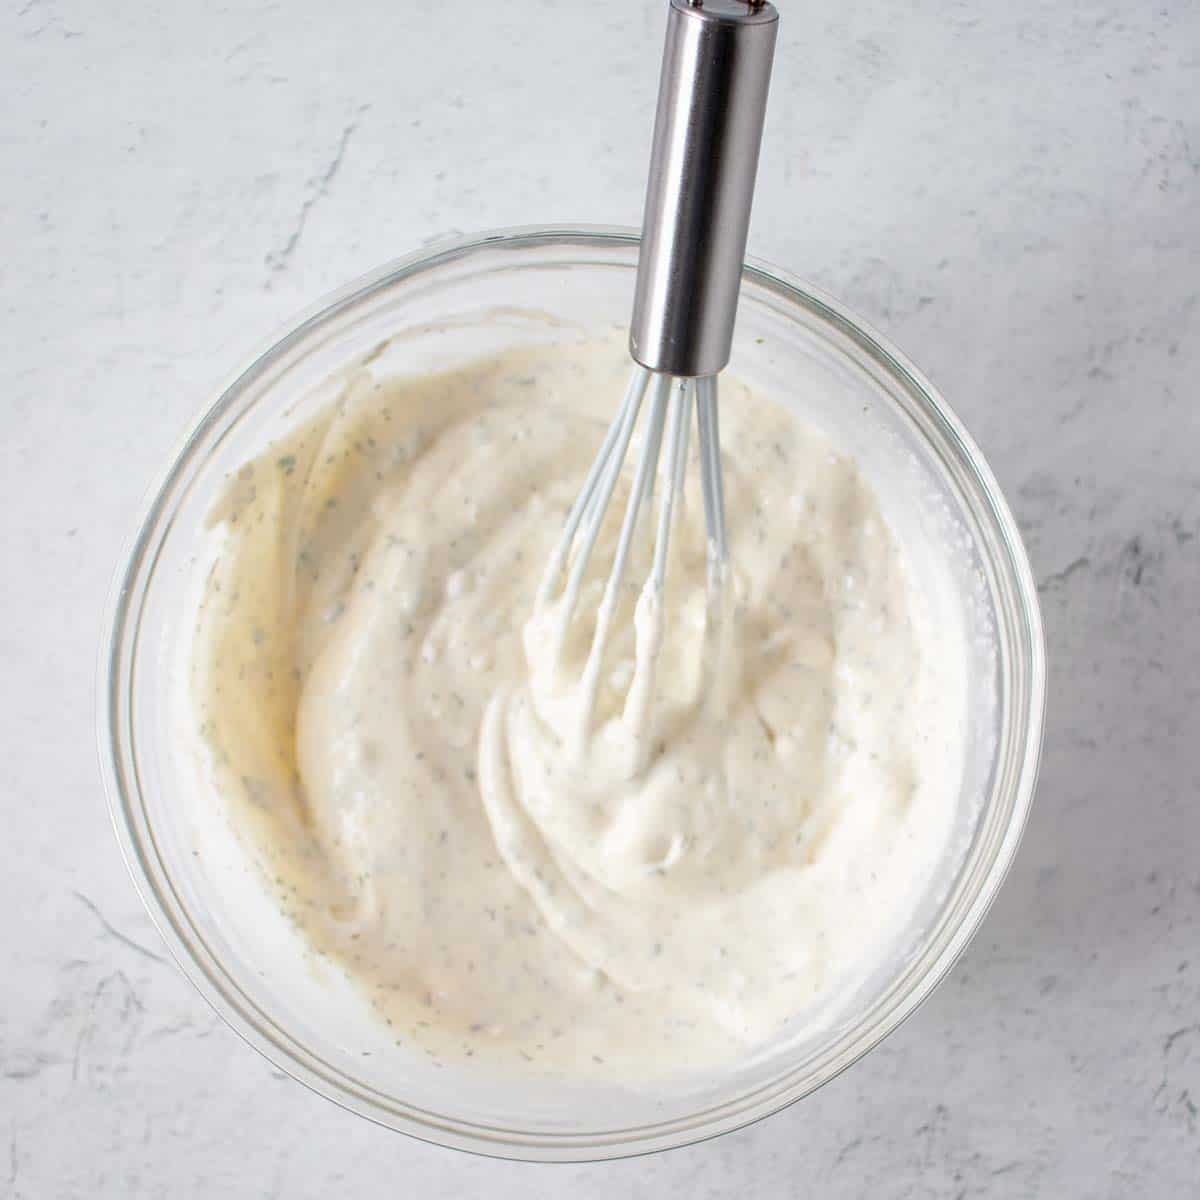 Homemade ranch dip after being mixed together in a small mixing bowl with a whisk.